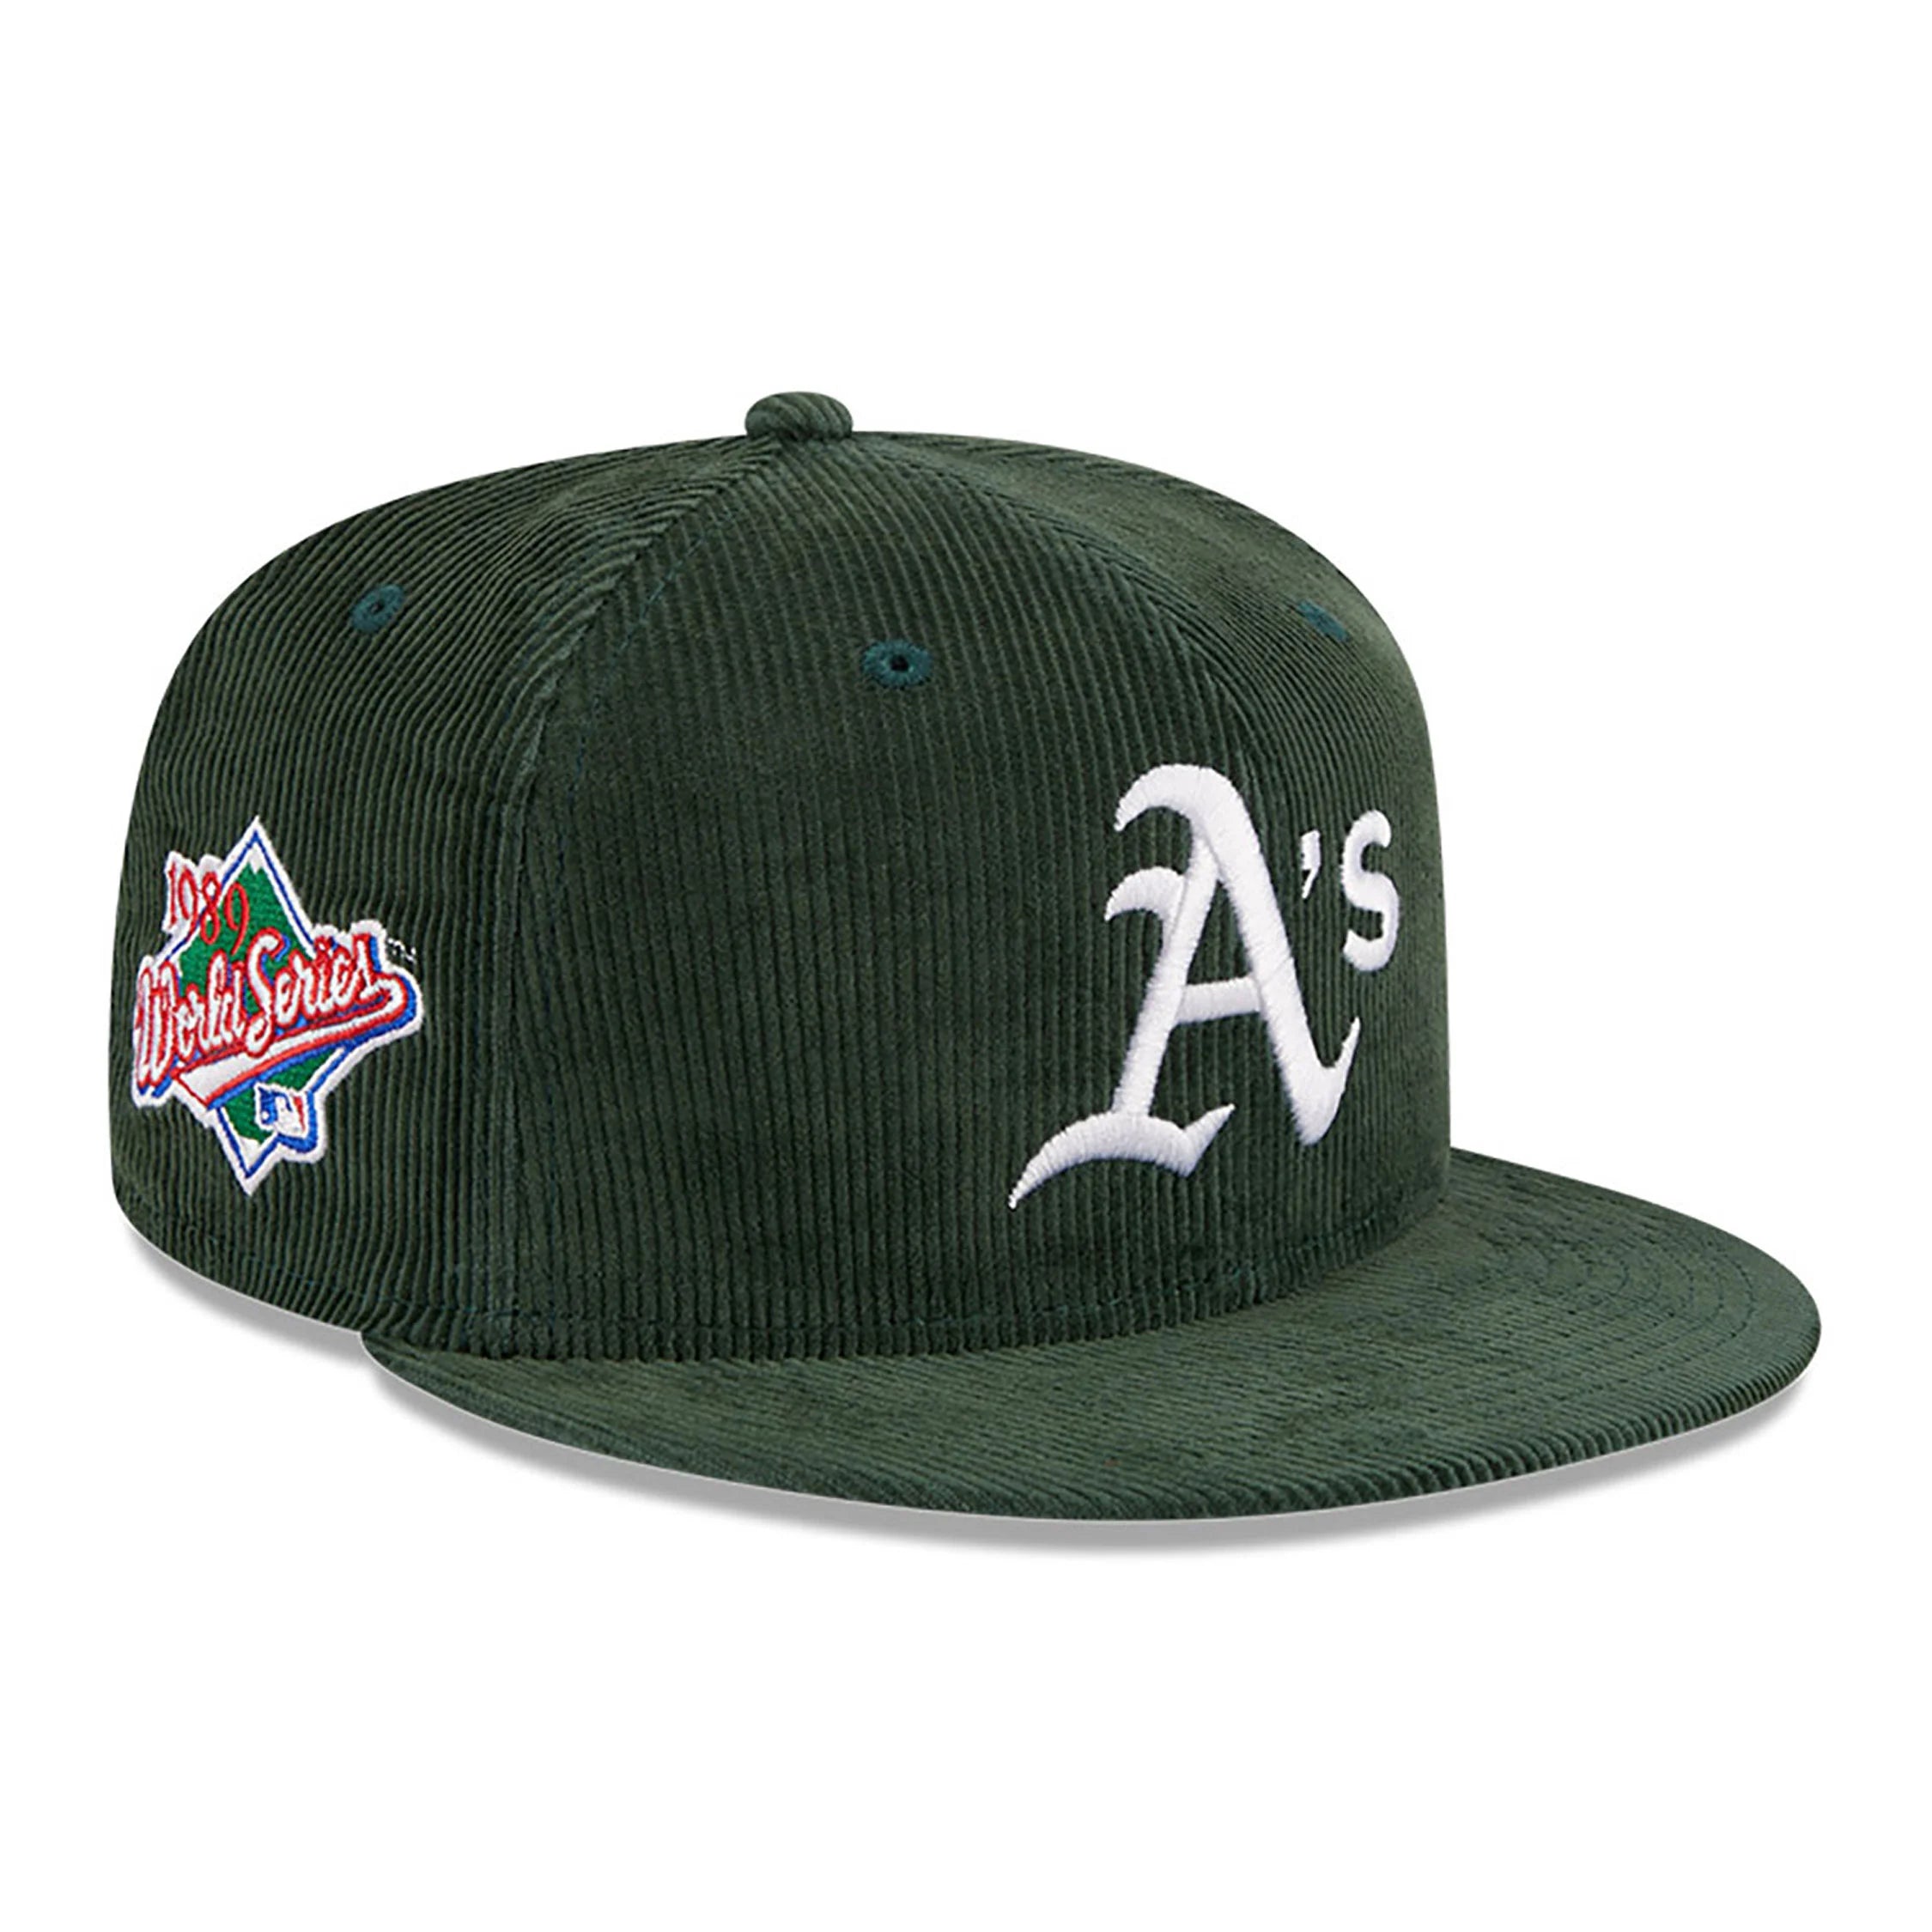 NEW ERA 59FIFTY MLB THROWBACK CORD OAKLAND ATHLETICS DARK GREEN FITTED CAP